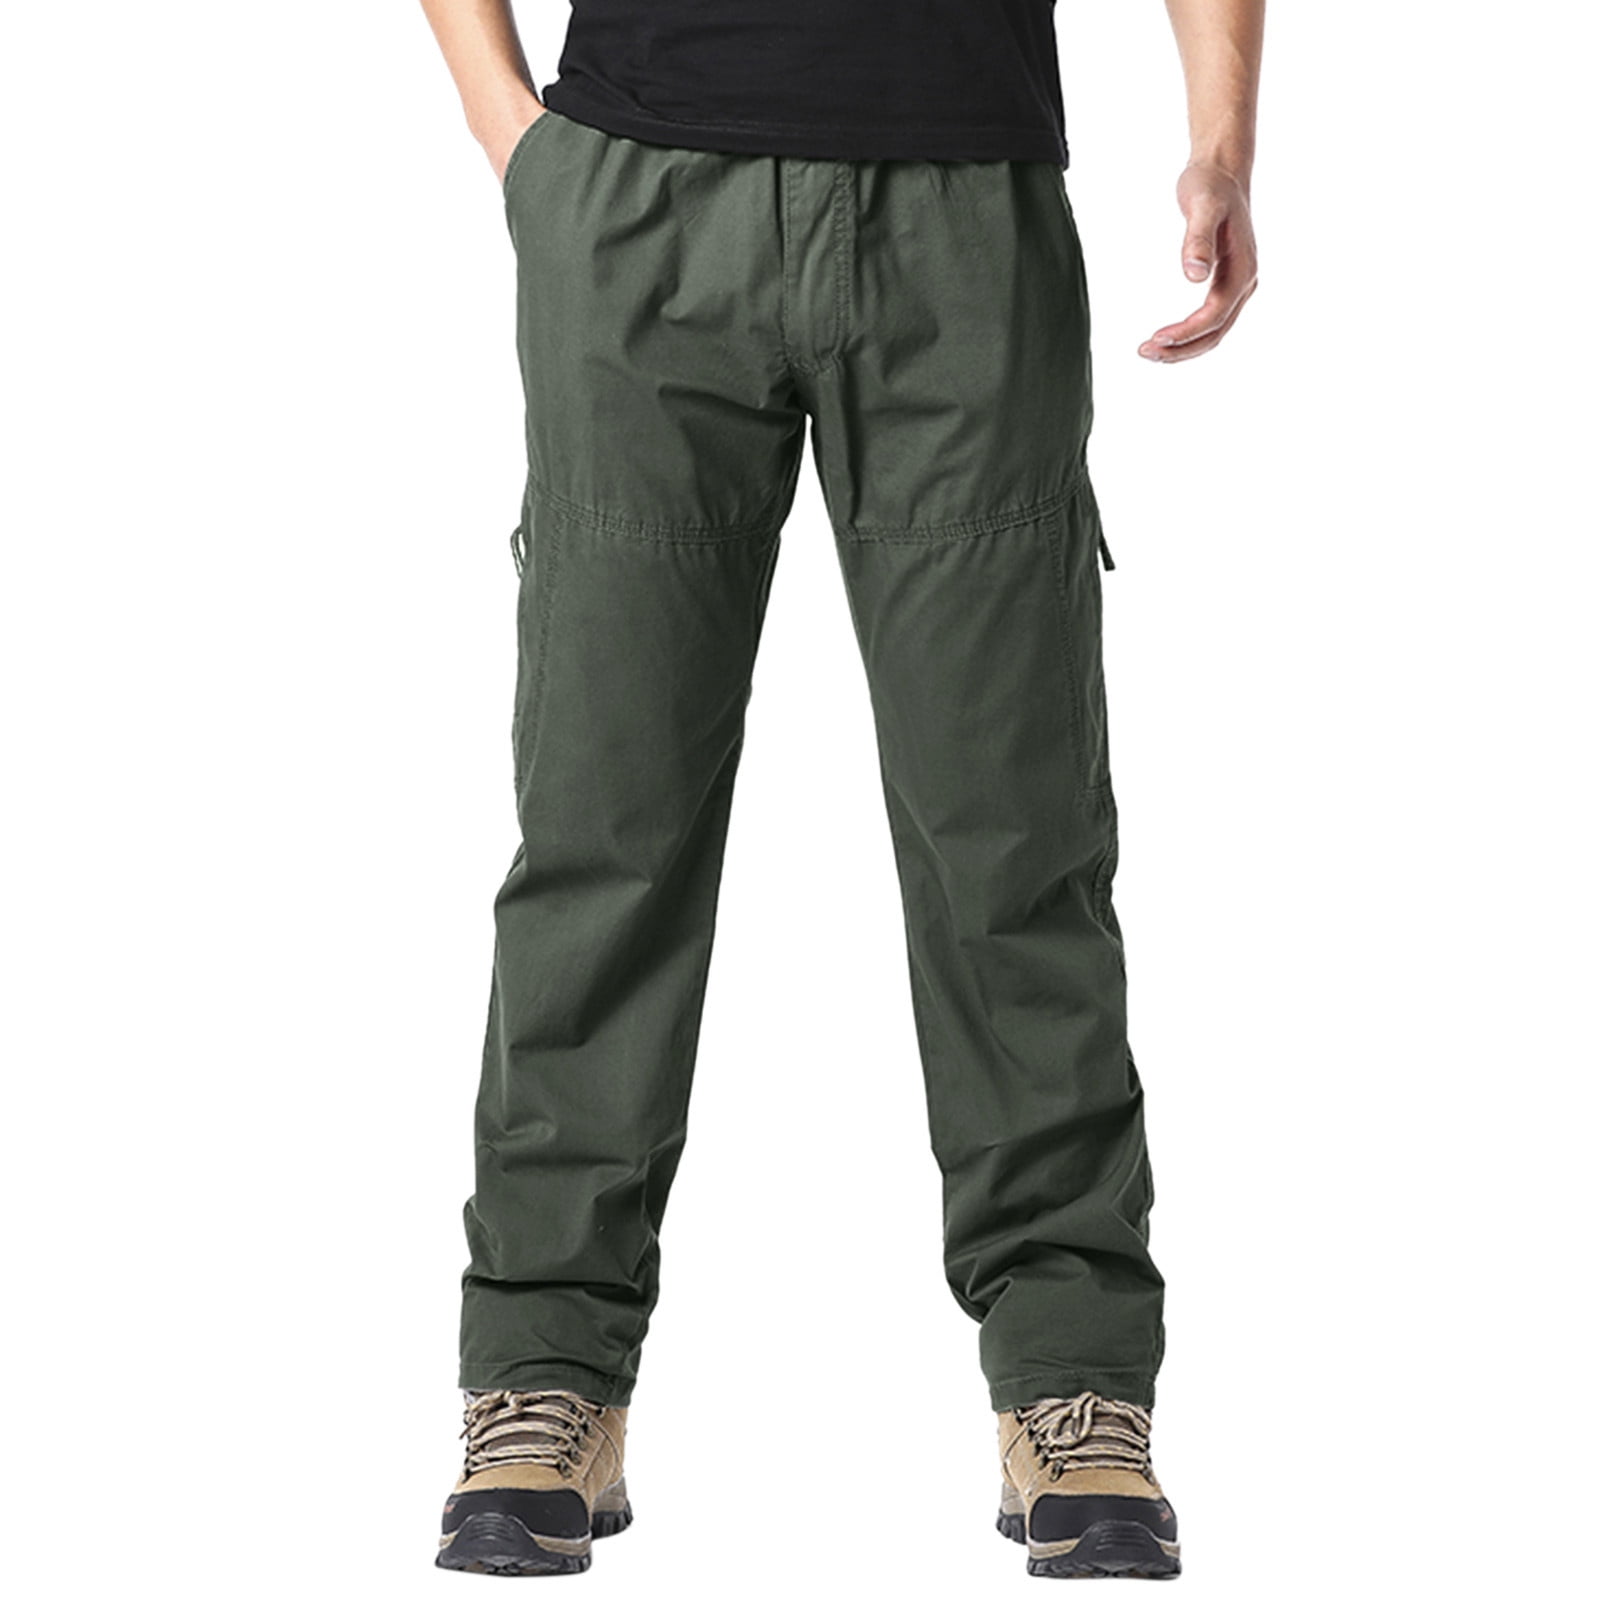 Outfmvch cargo pants for men Corduroy Multi Pocket Straight High